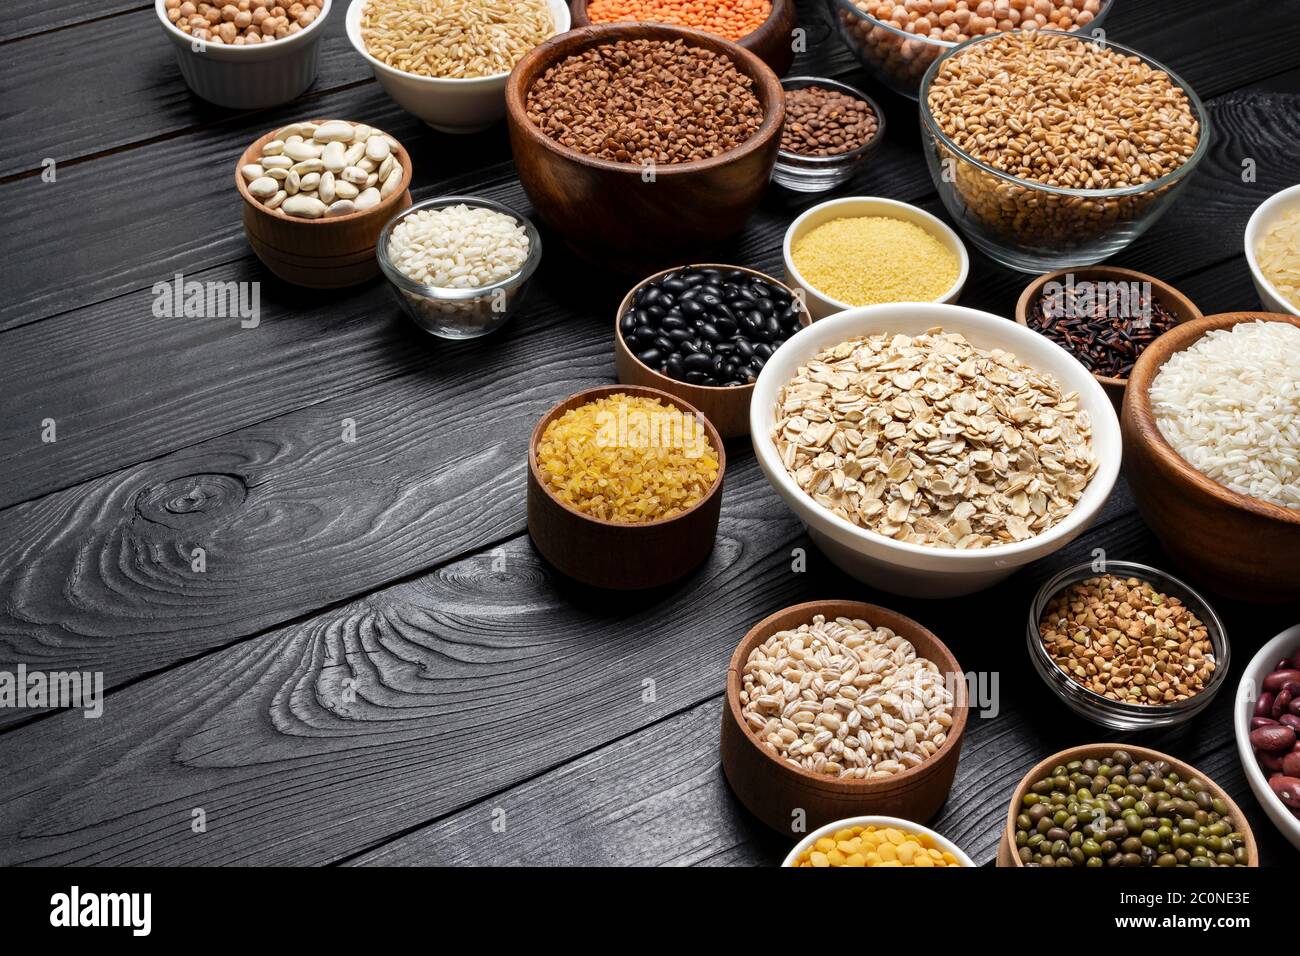 Cereals, grains, seeds and groats black wooden background Stock Photo